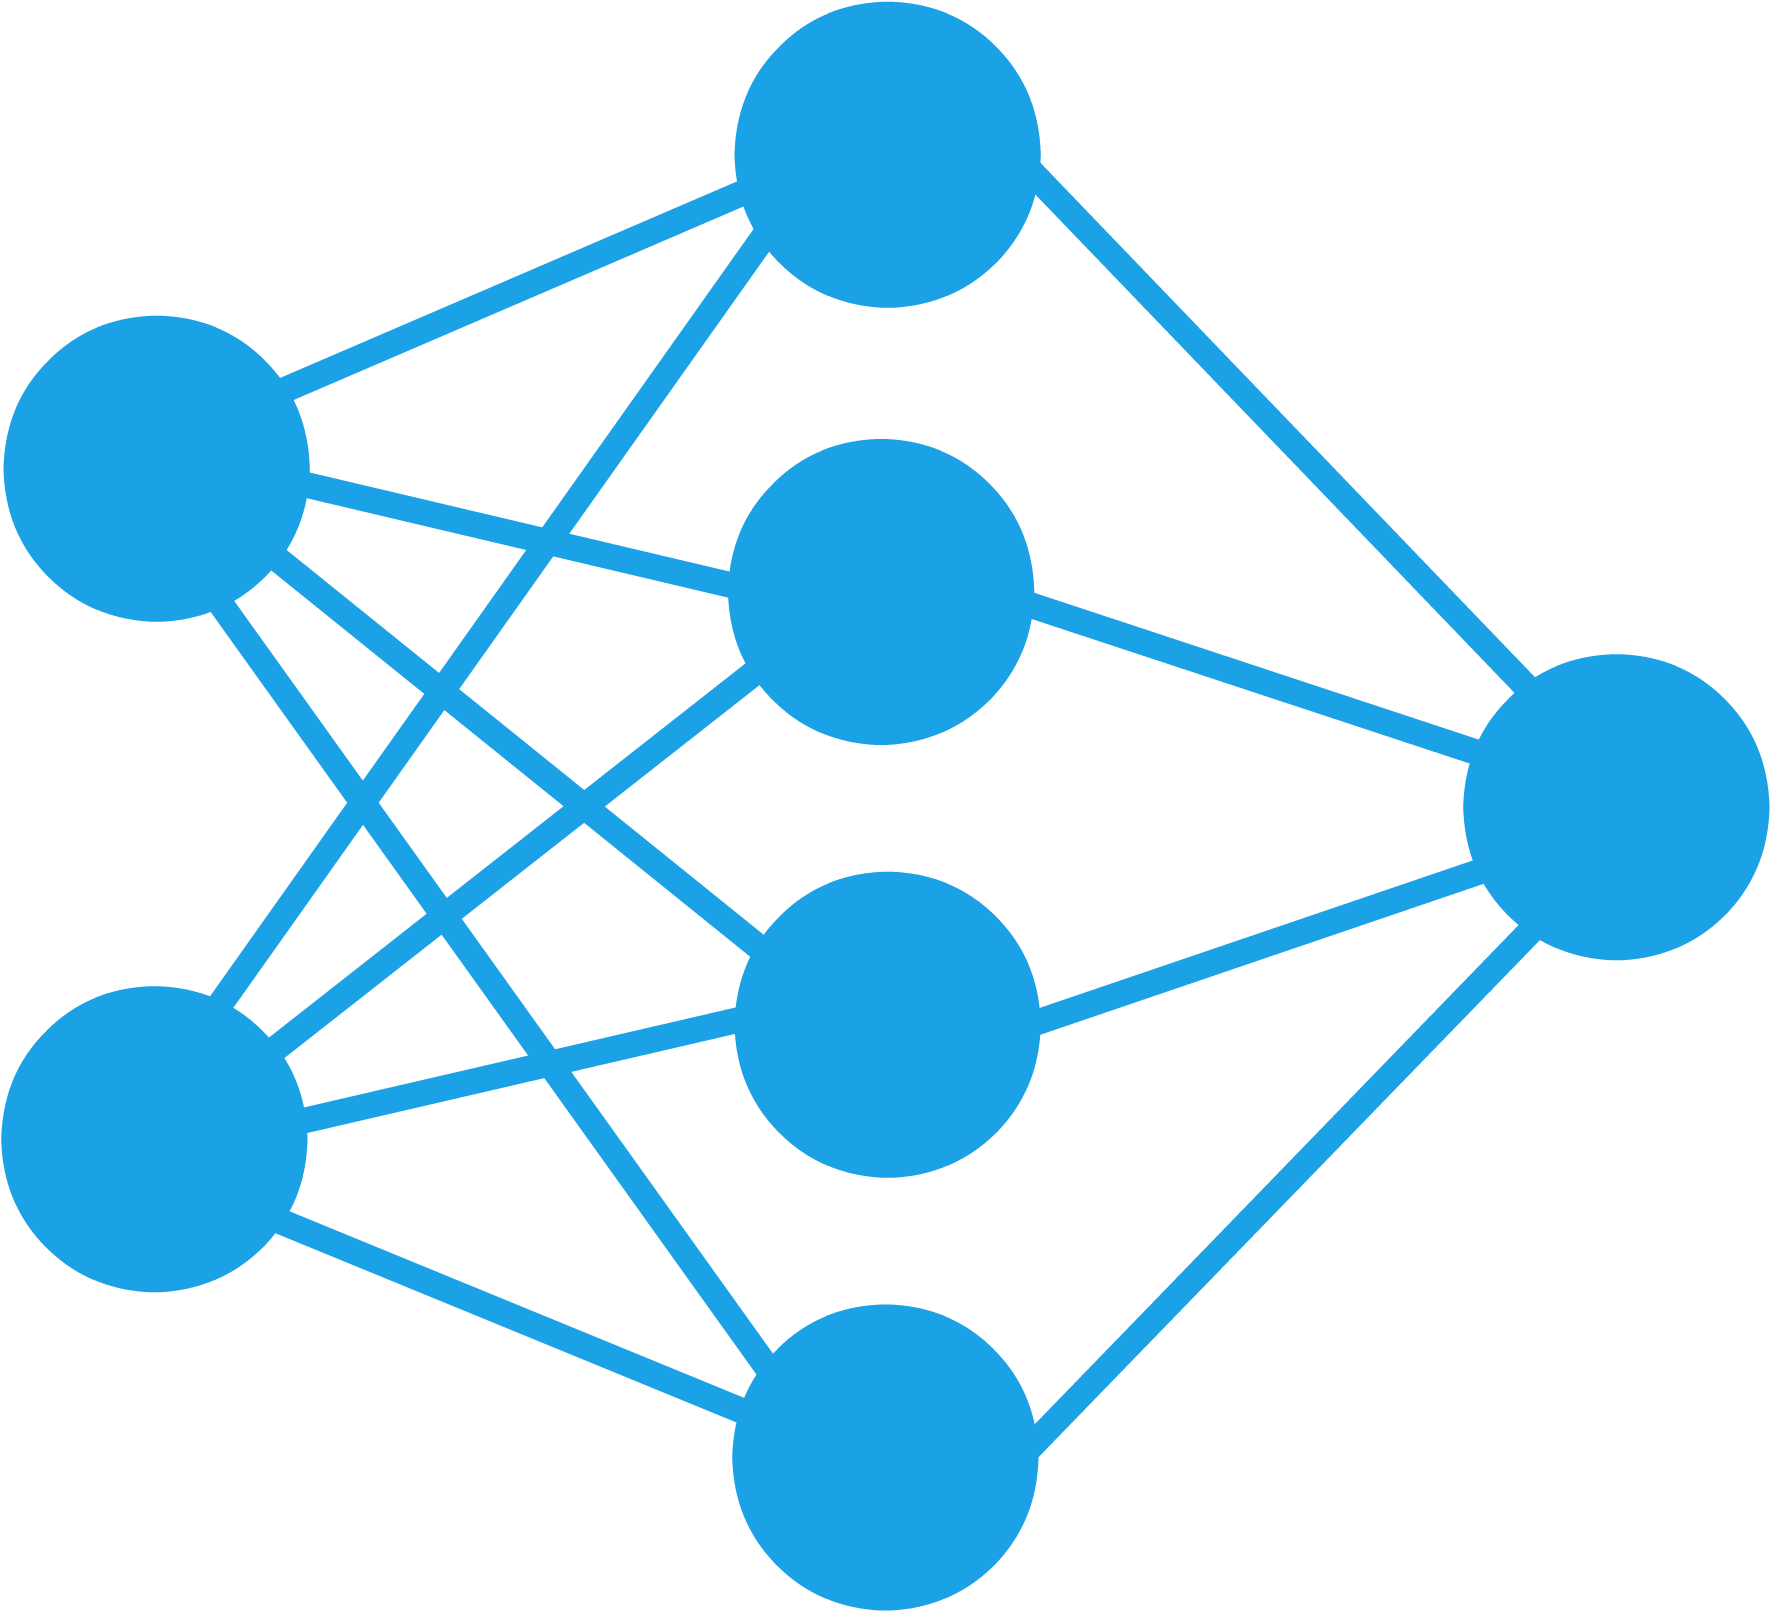 Networking - Deep Neural Network Icon (1785x1785)